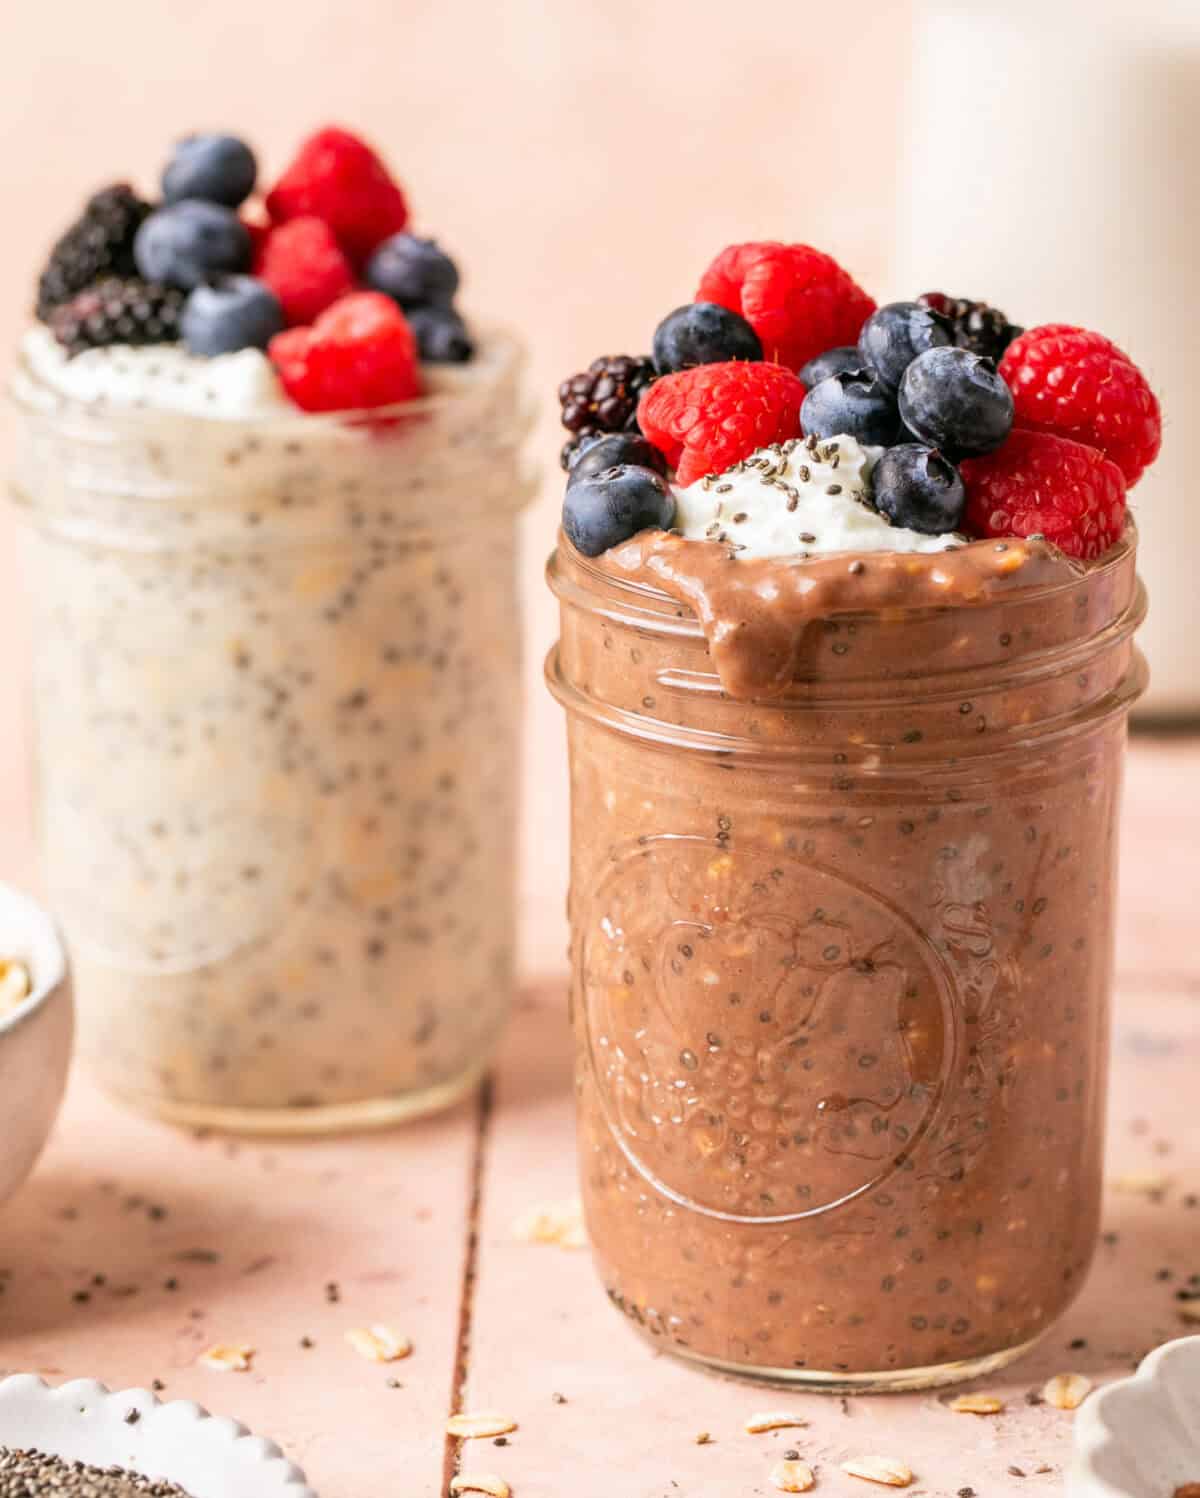 Two jars of overnight oats one chocolate and the other vanilla both topped with mixed berries, greek yogurt and sprinkle of chia seeds.